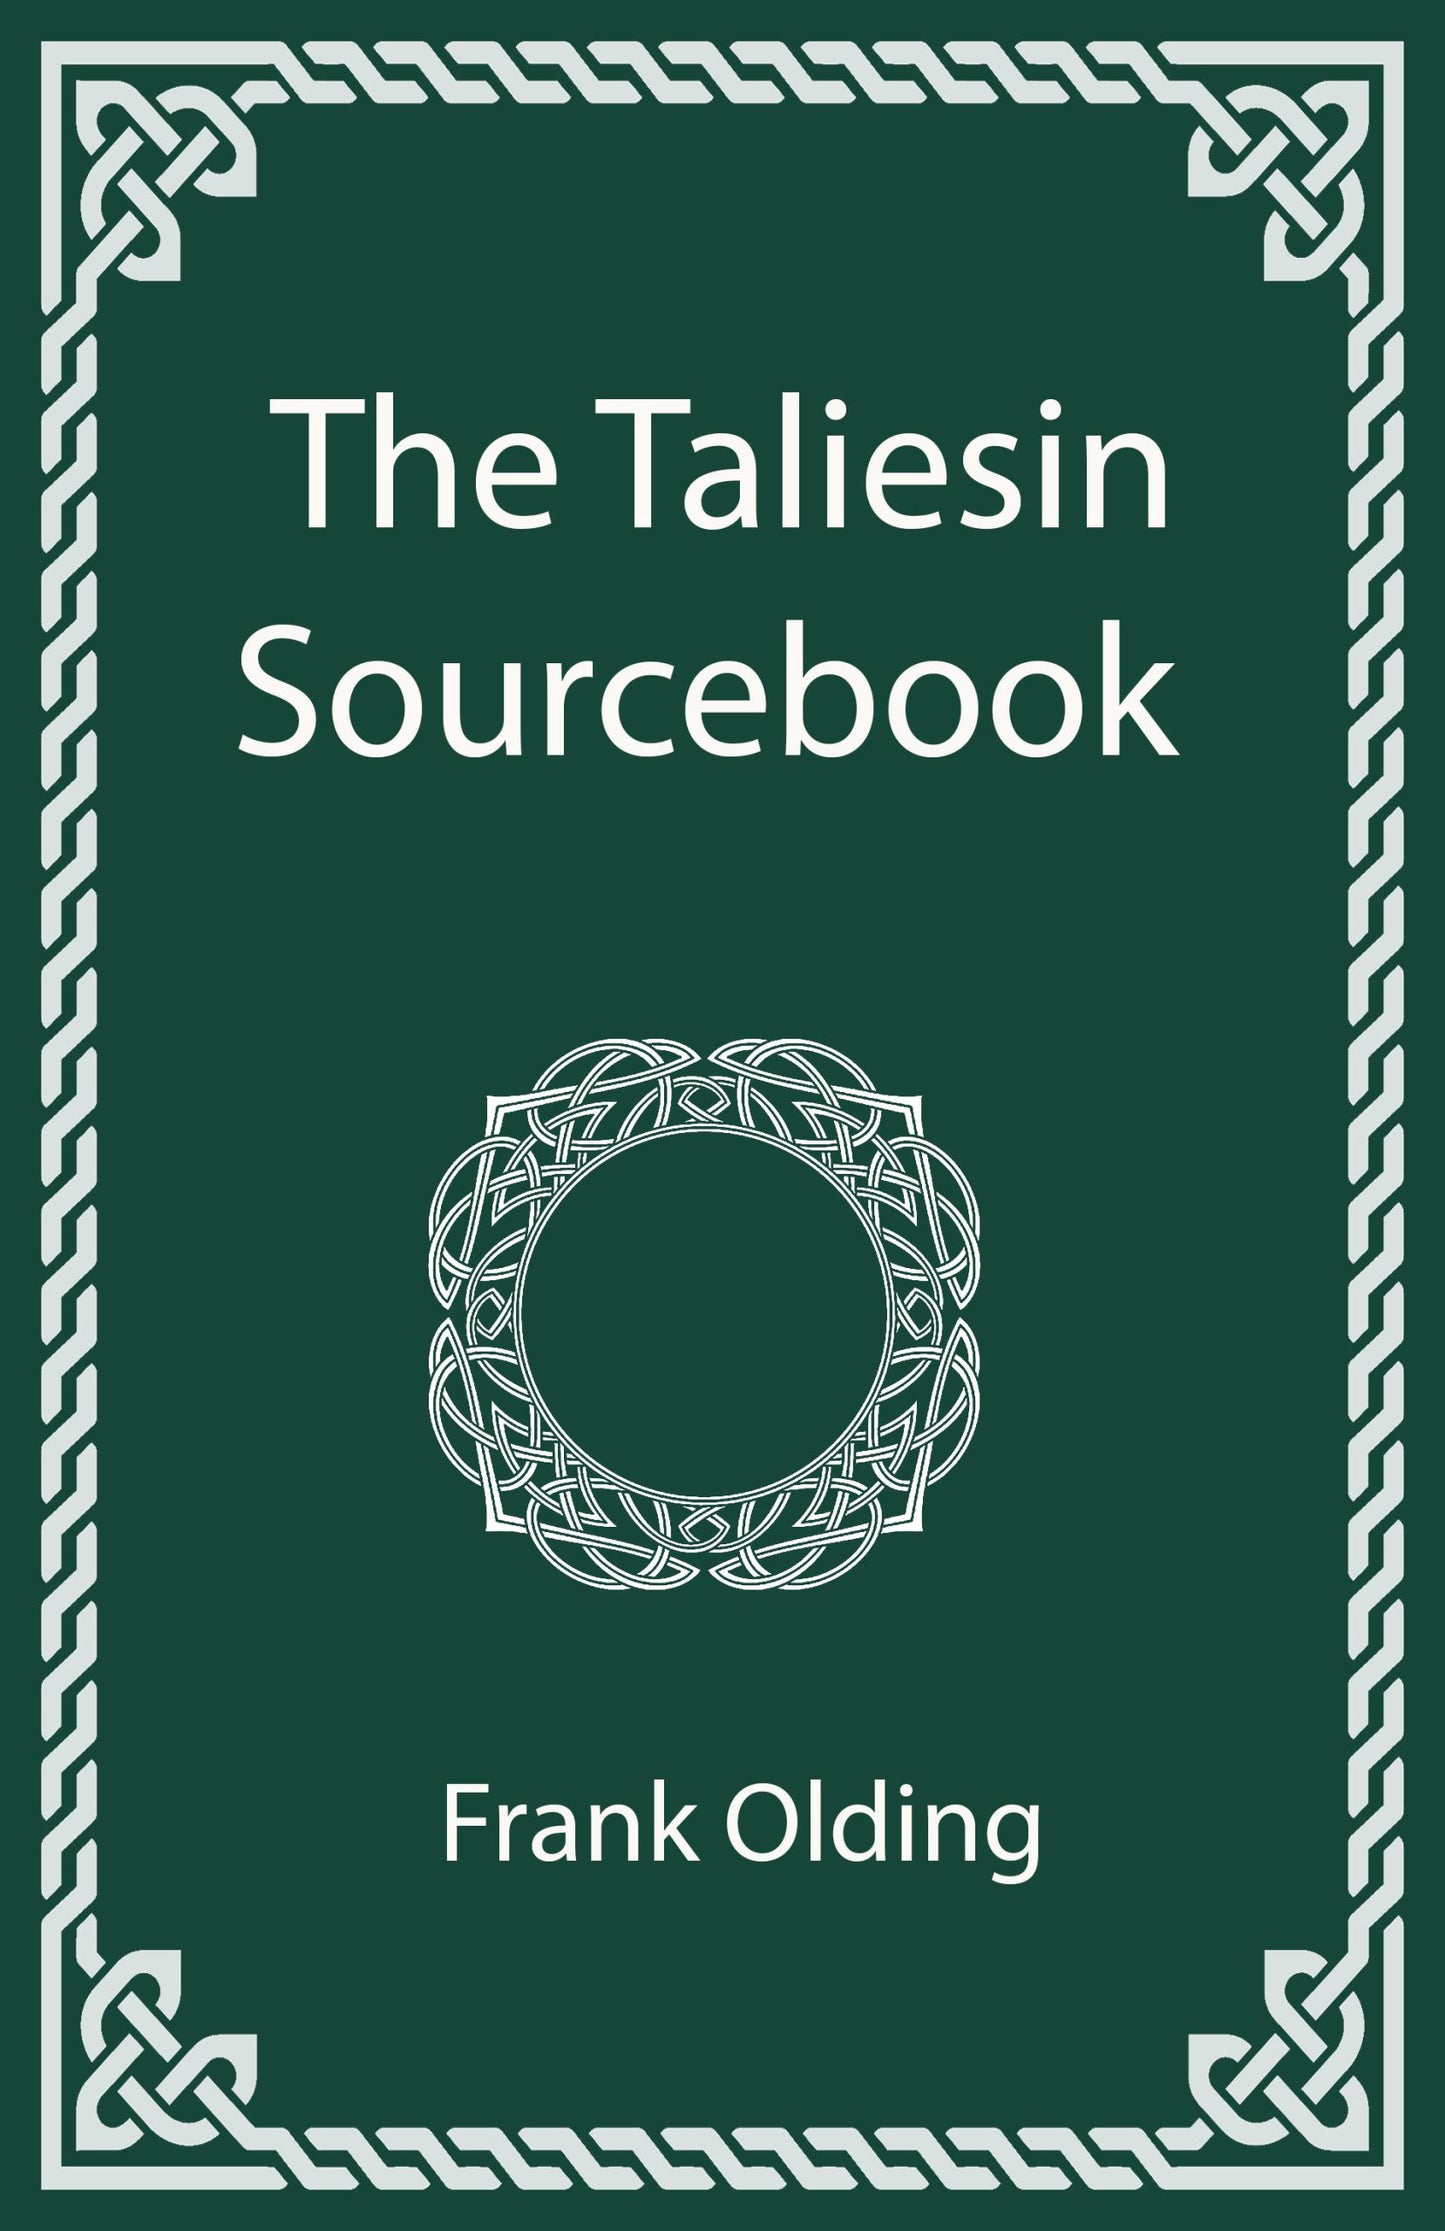 The Taliesin Sourcebook by Frank Olding